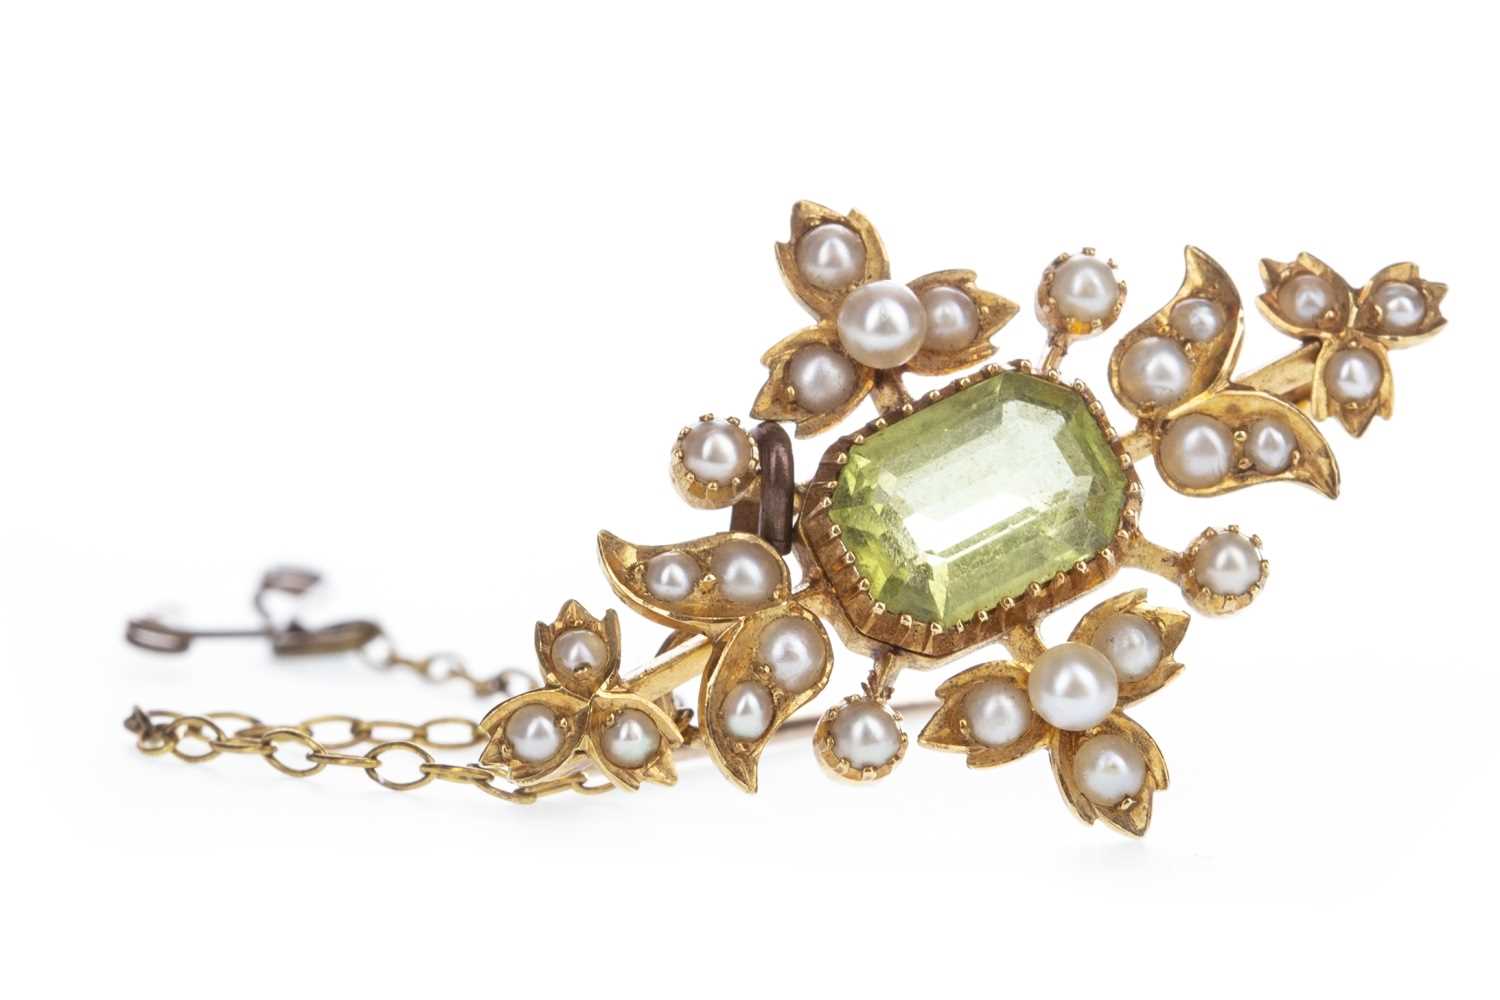 Lot 324 - AN EDWARDIAN GEM AND SEED PEARL BROOCH